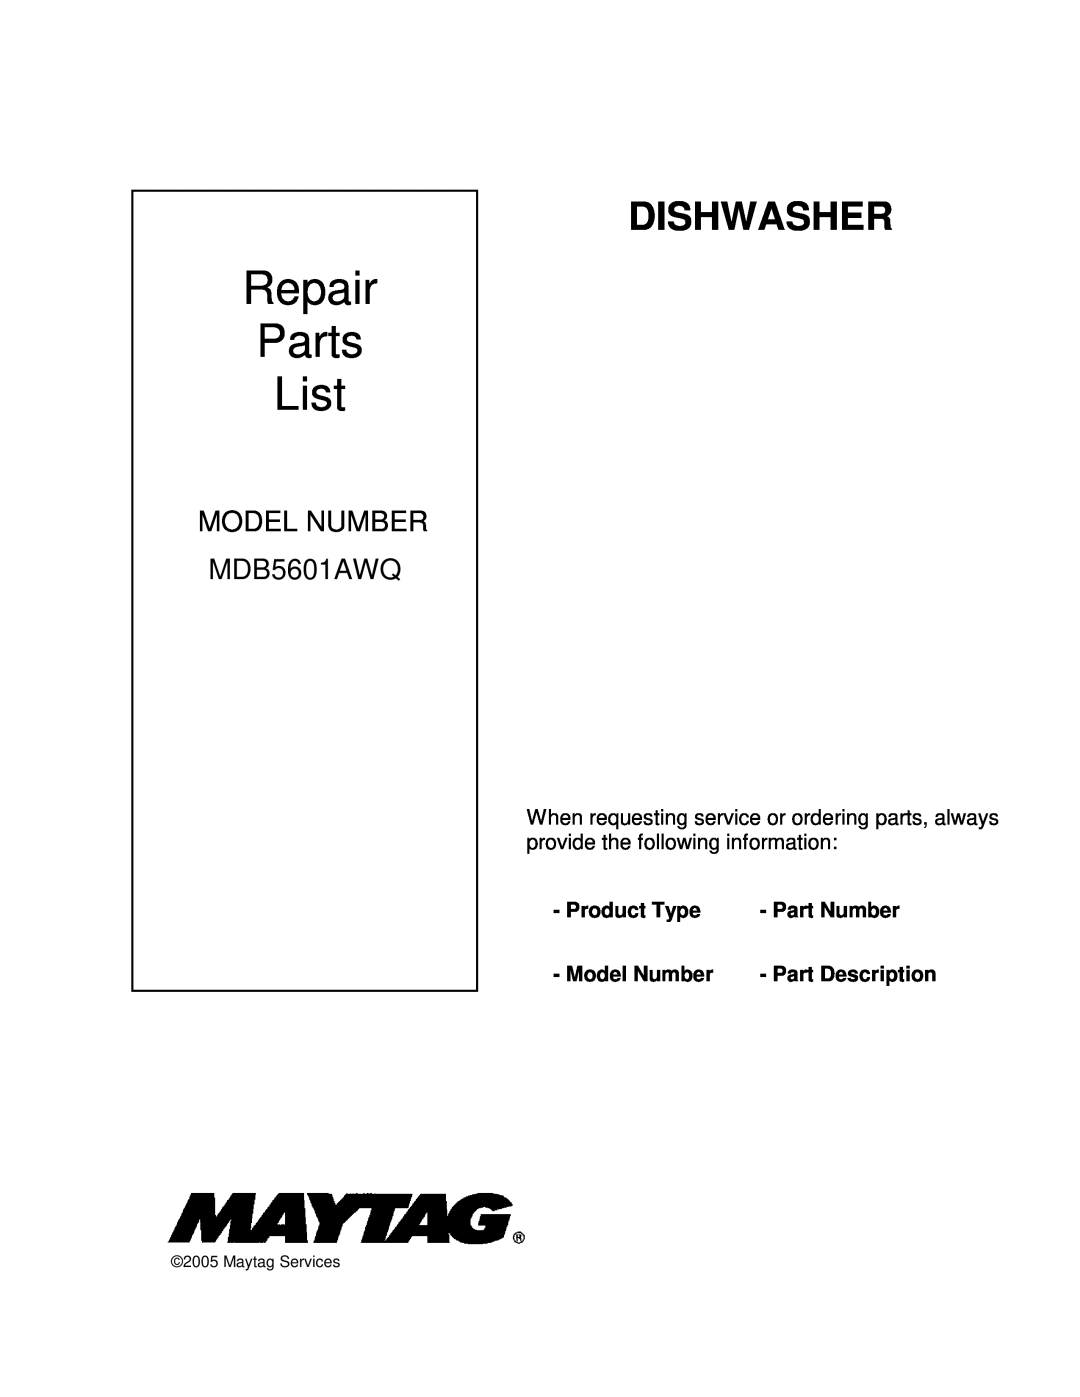 Maytag MDB5601AWQ manual Product Type, Part Number, Model Number, Part Description, Repair Parts List, Dishwasher 